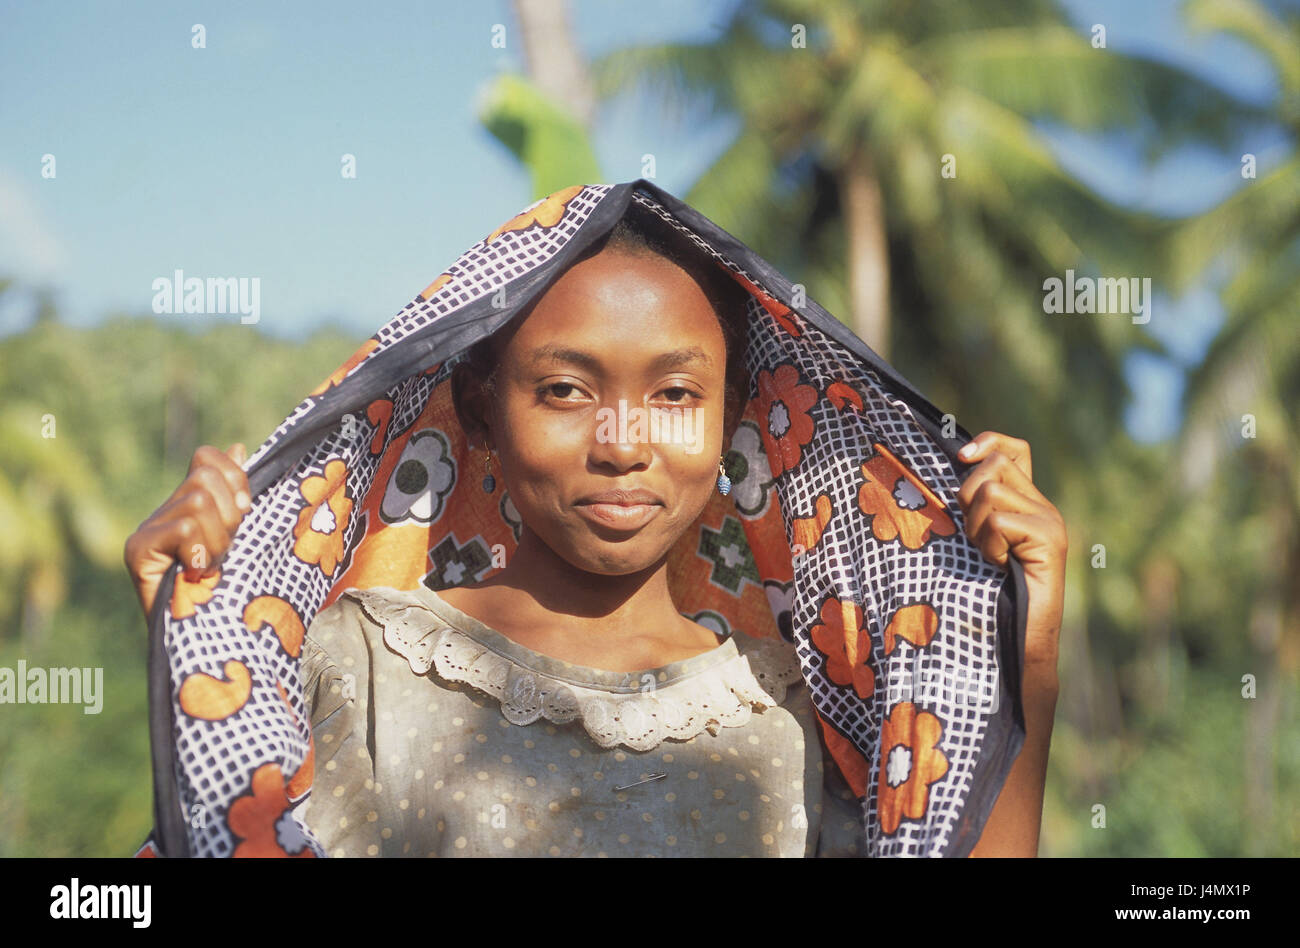 The Comoro Archipelago, island Anjouan, Moya, girl, smiles, headscarf, portrait, no model release! Africa, Indian ocean, island state, Nzwani, non-whites, young persons, swarthy, swarthy, locals, headgear, cloth, religiously, faith, view camera, shyly, uncertainly, outside Stock Photo